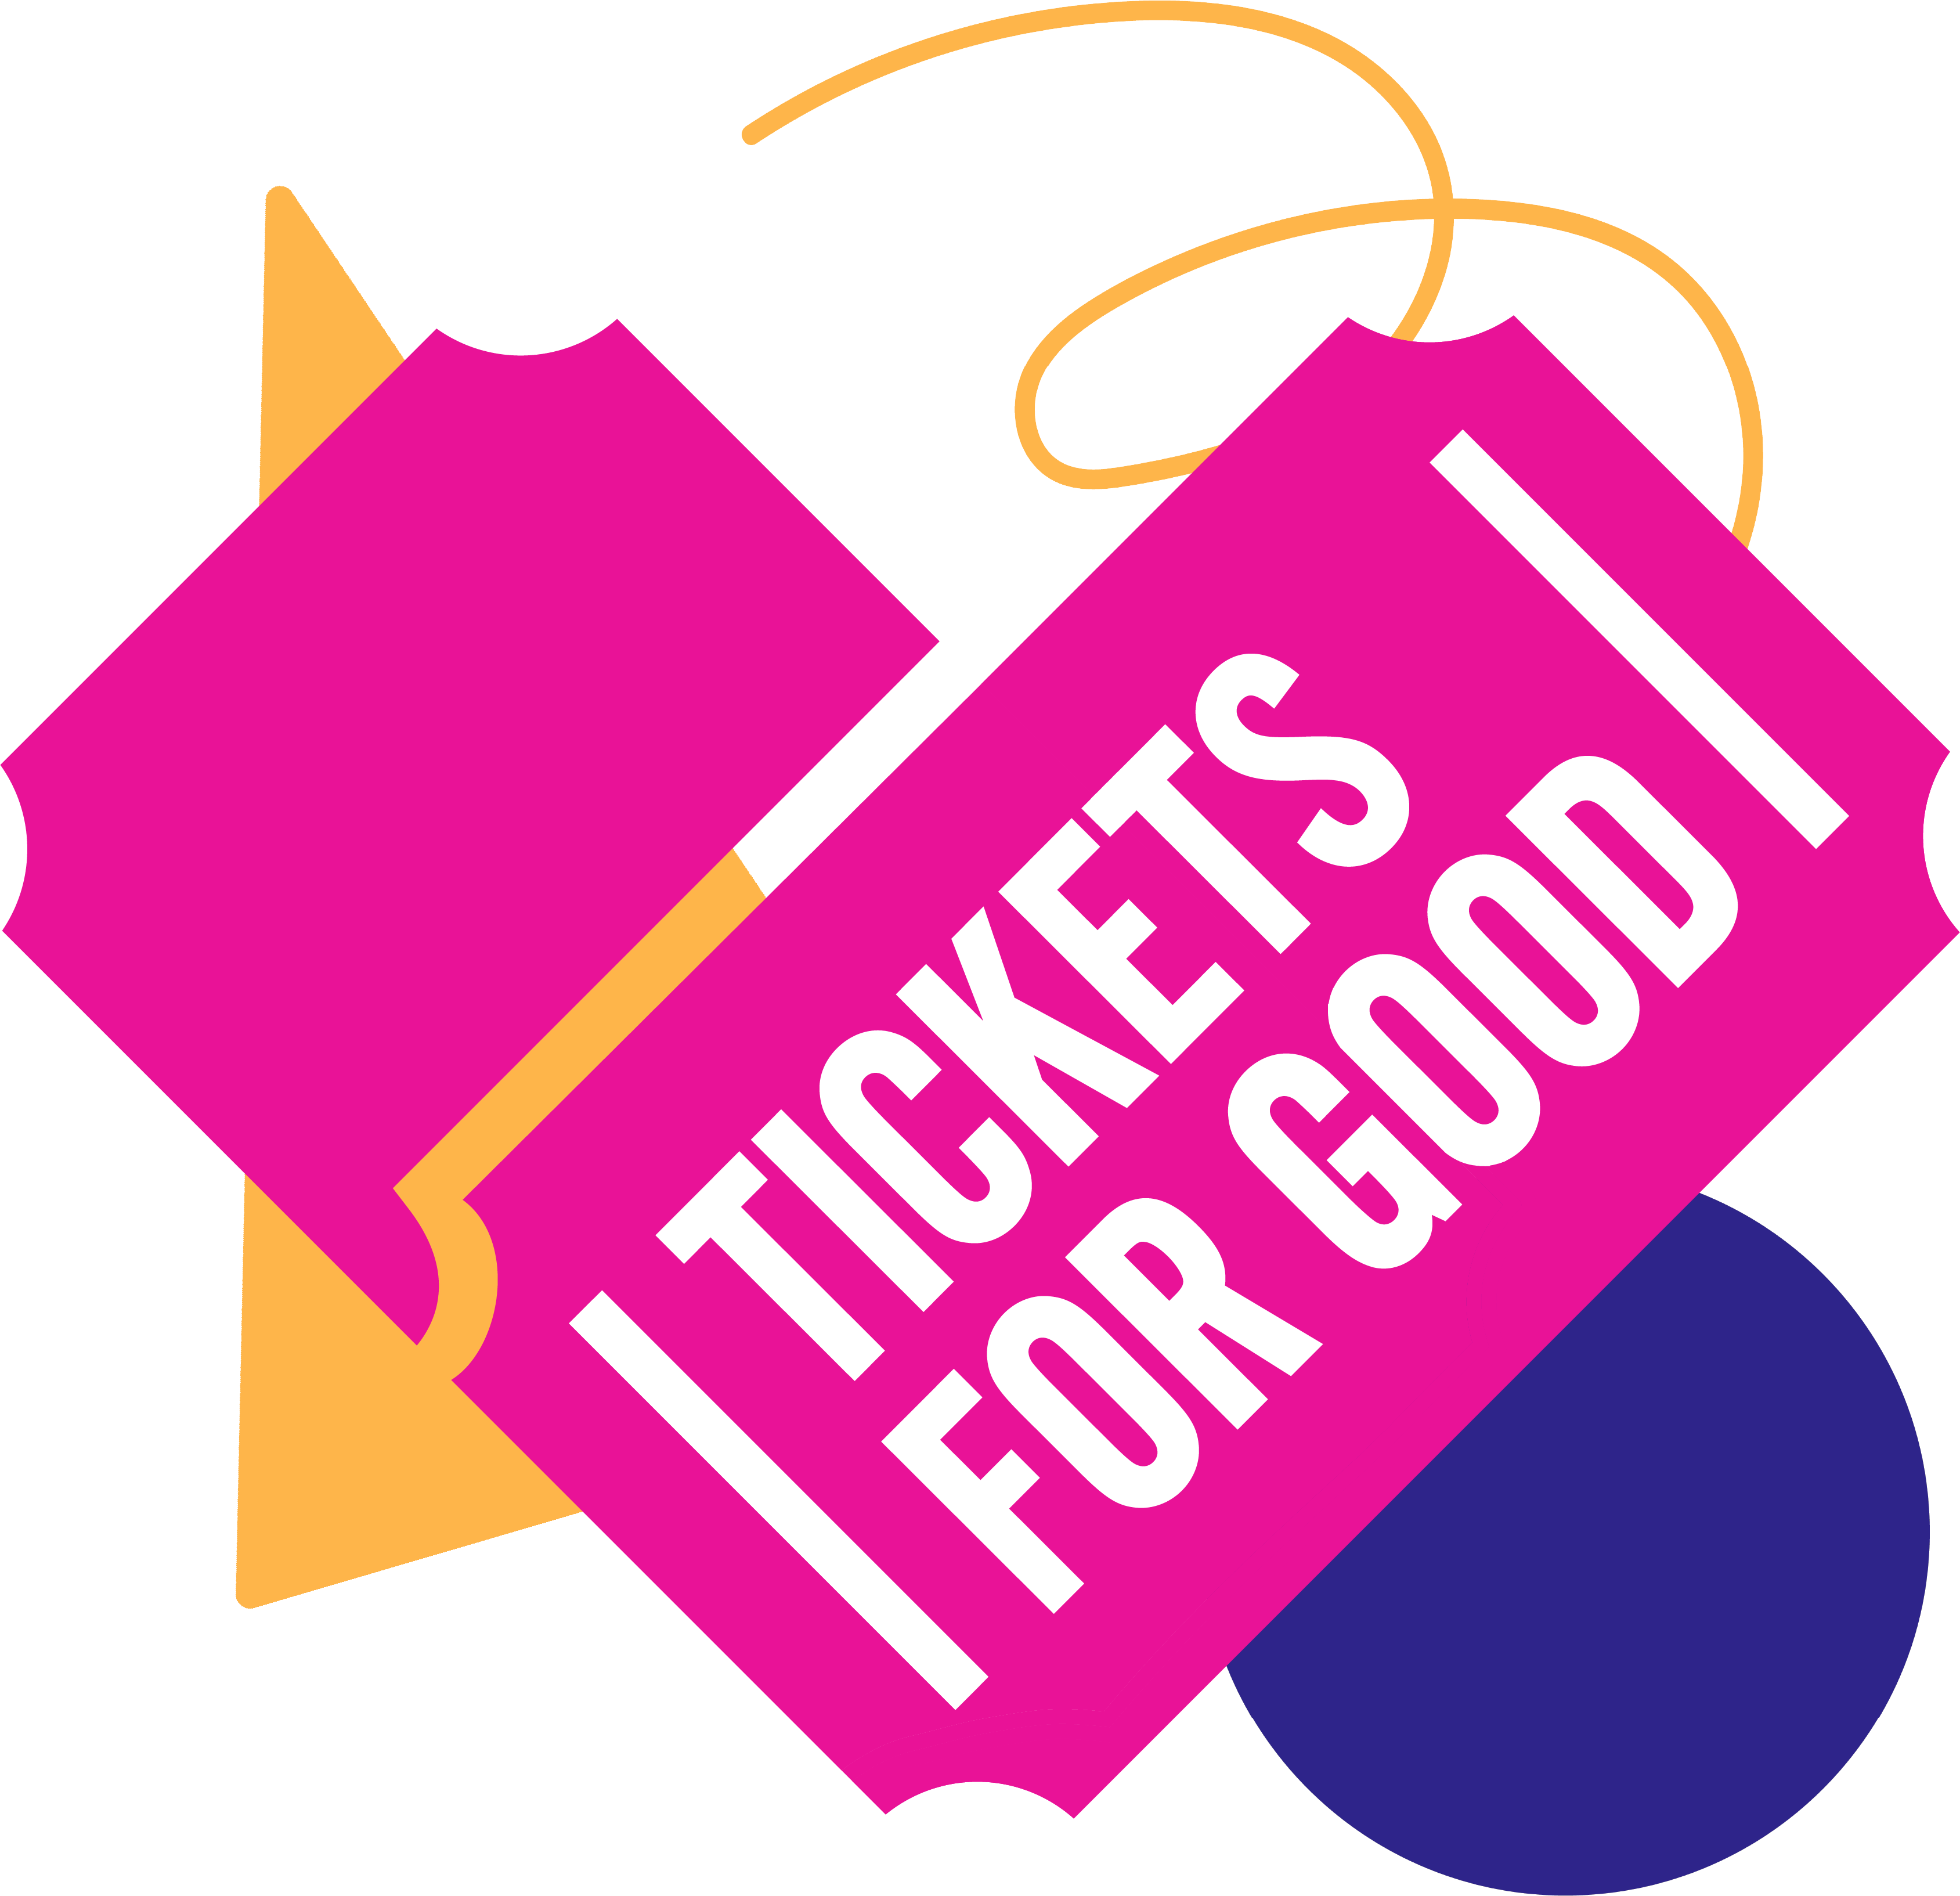 Tickets for Good logo